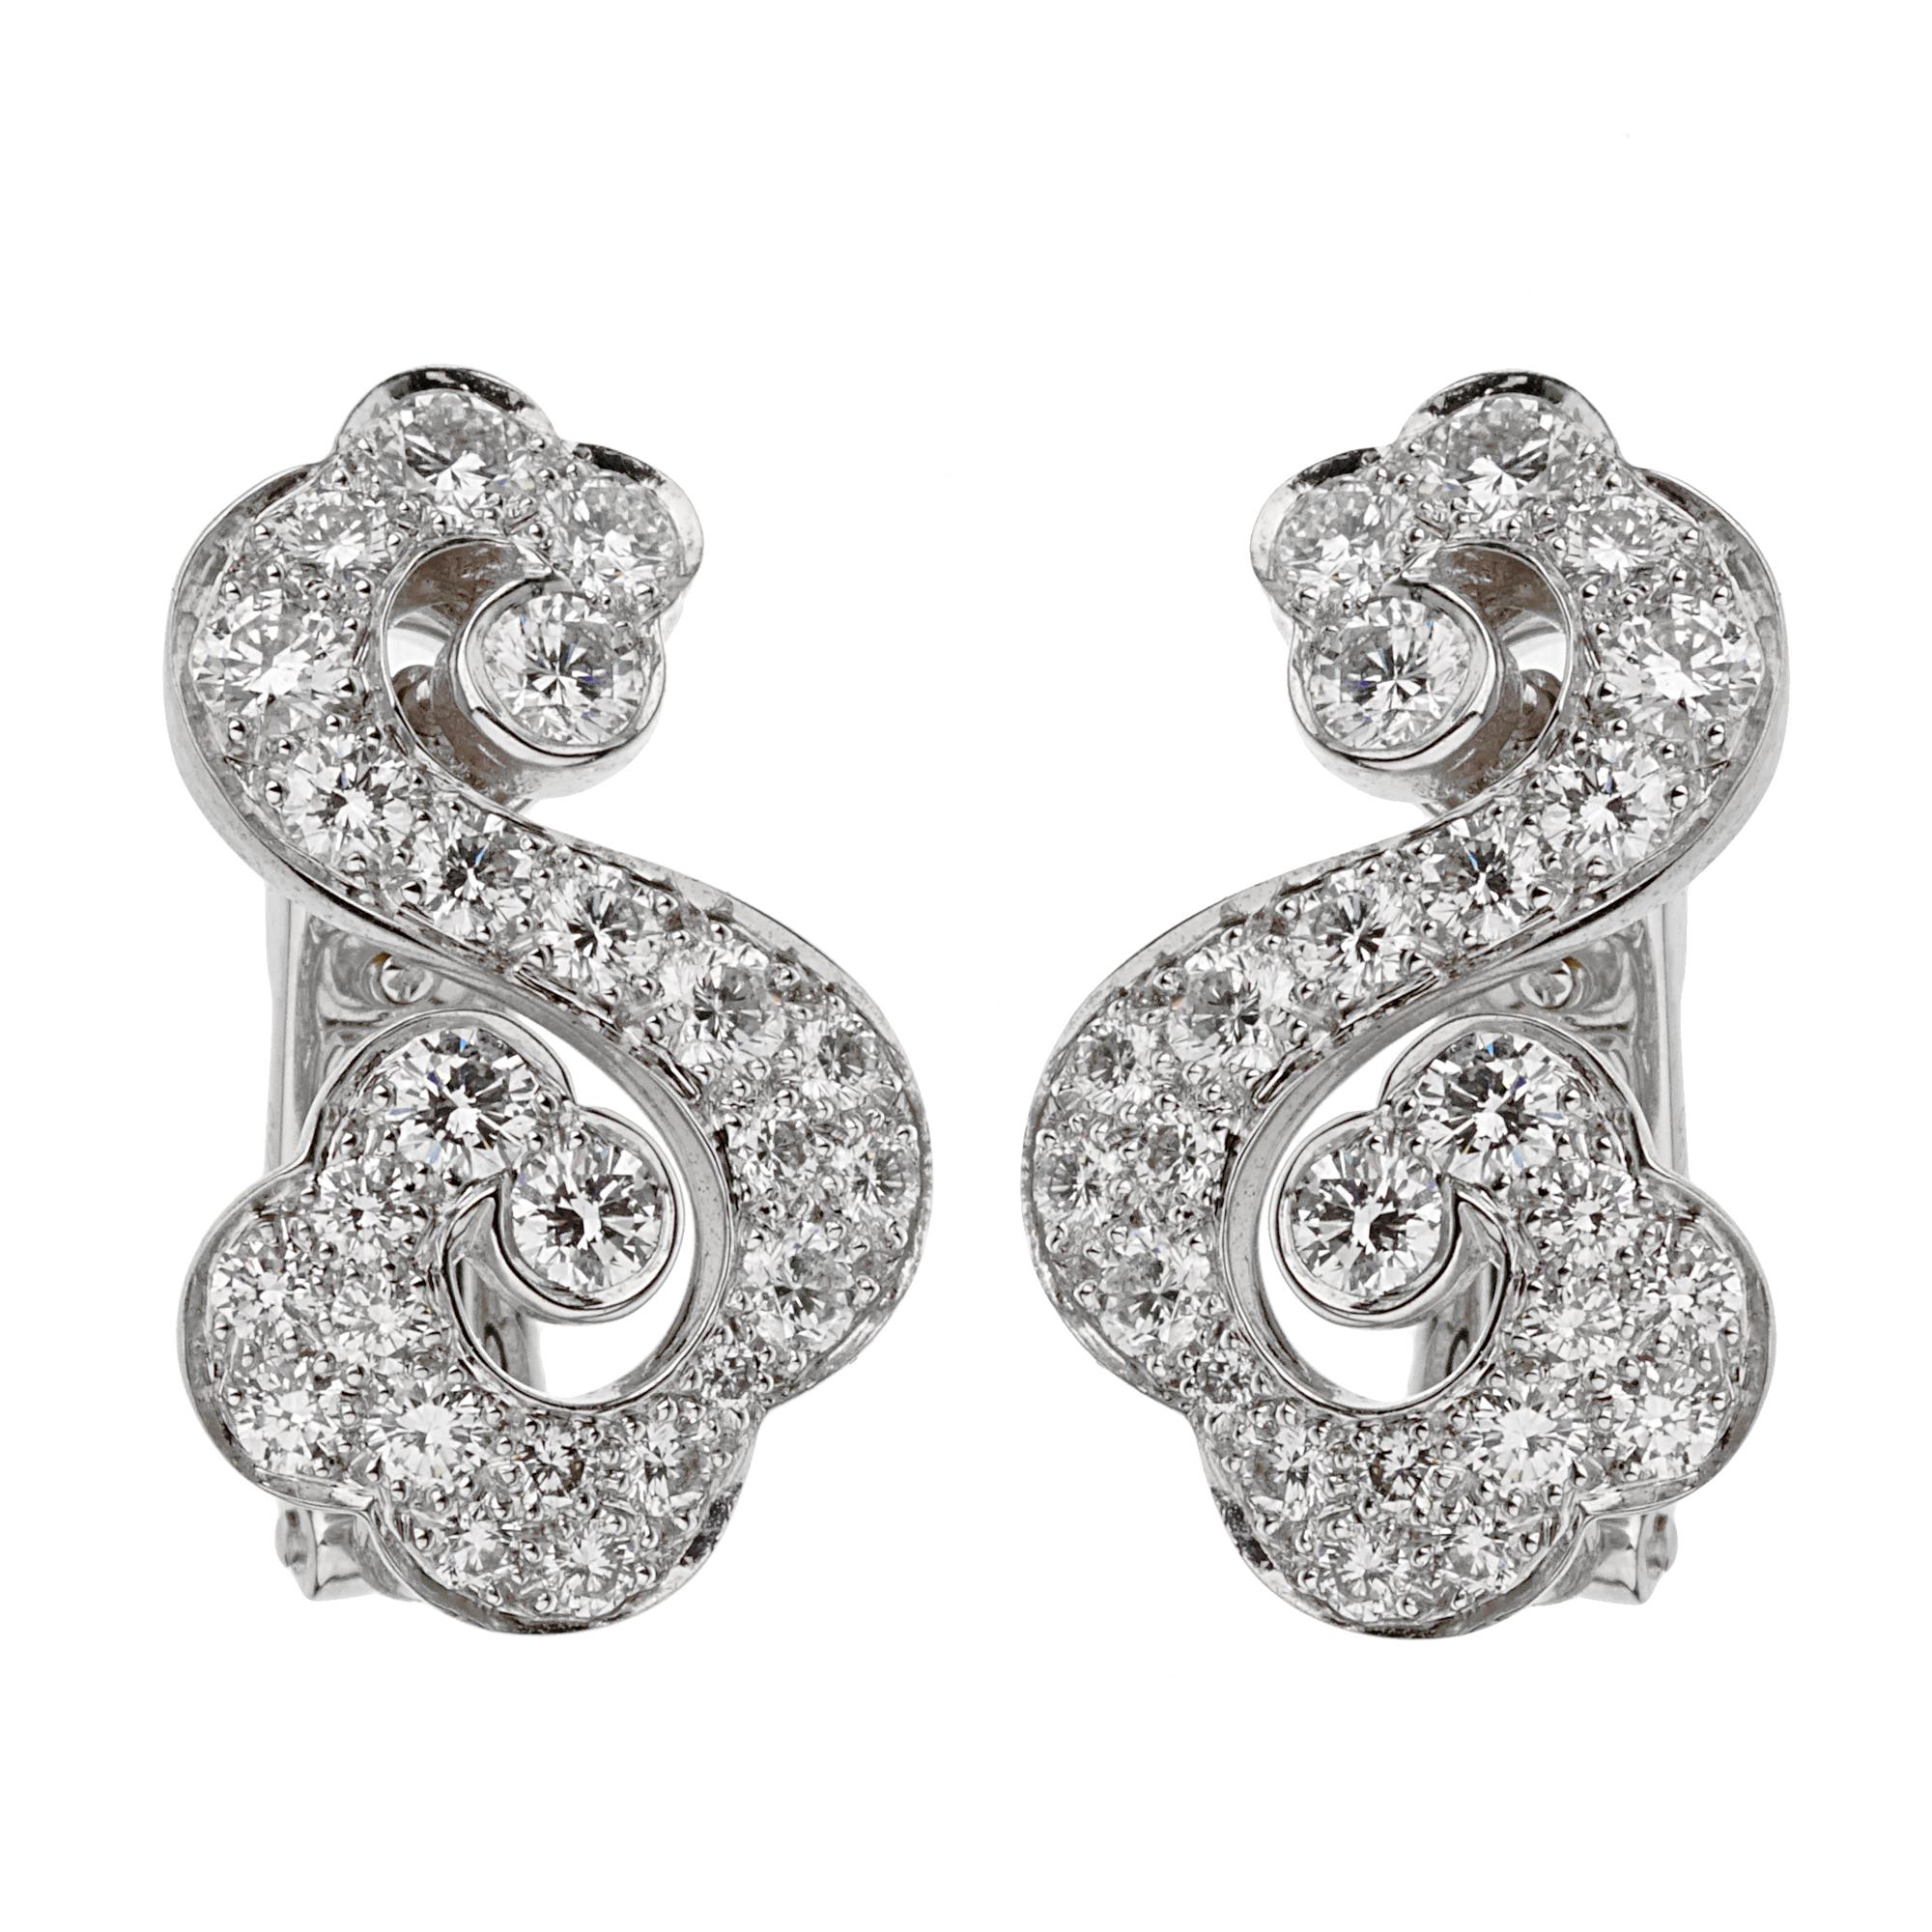 A magnificent pair of Cartier diamond earrings showcasing an openwork scrolling motif set in 18k white gold. The earrings boast 2.30ct of the finest original Cartier round brilliant cut diamonds.